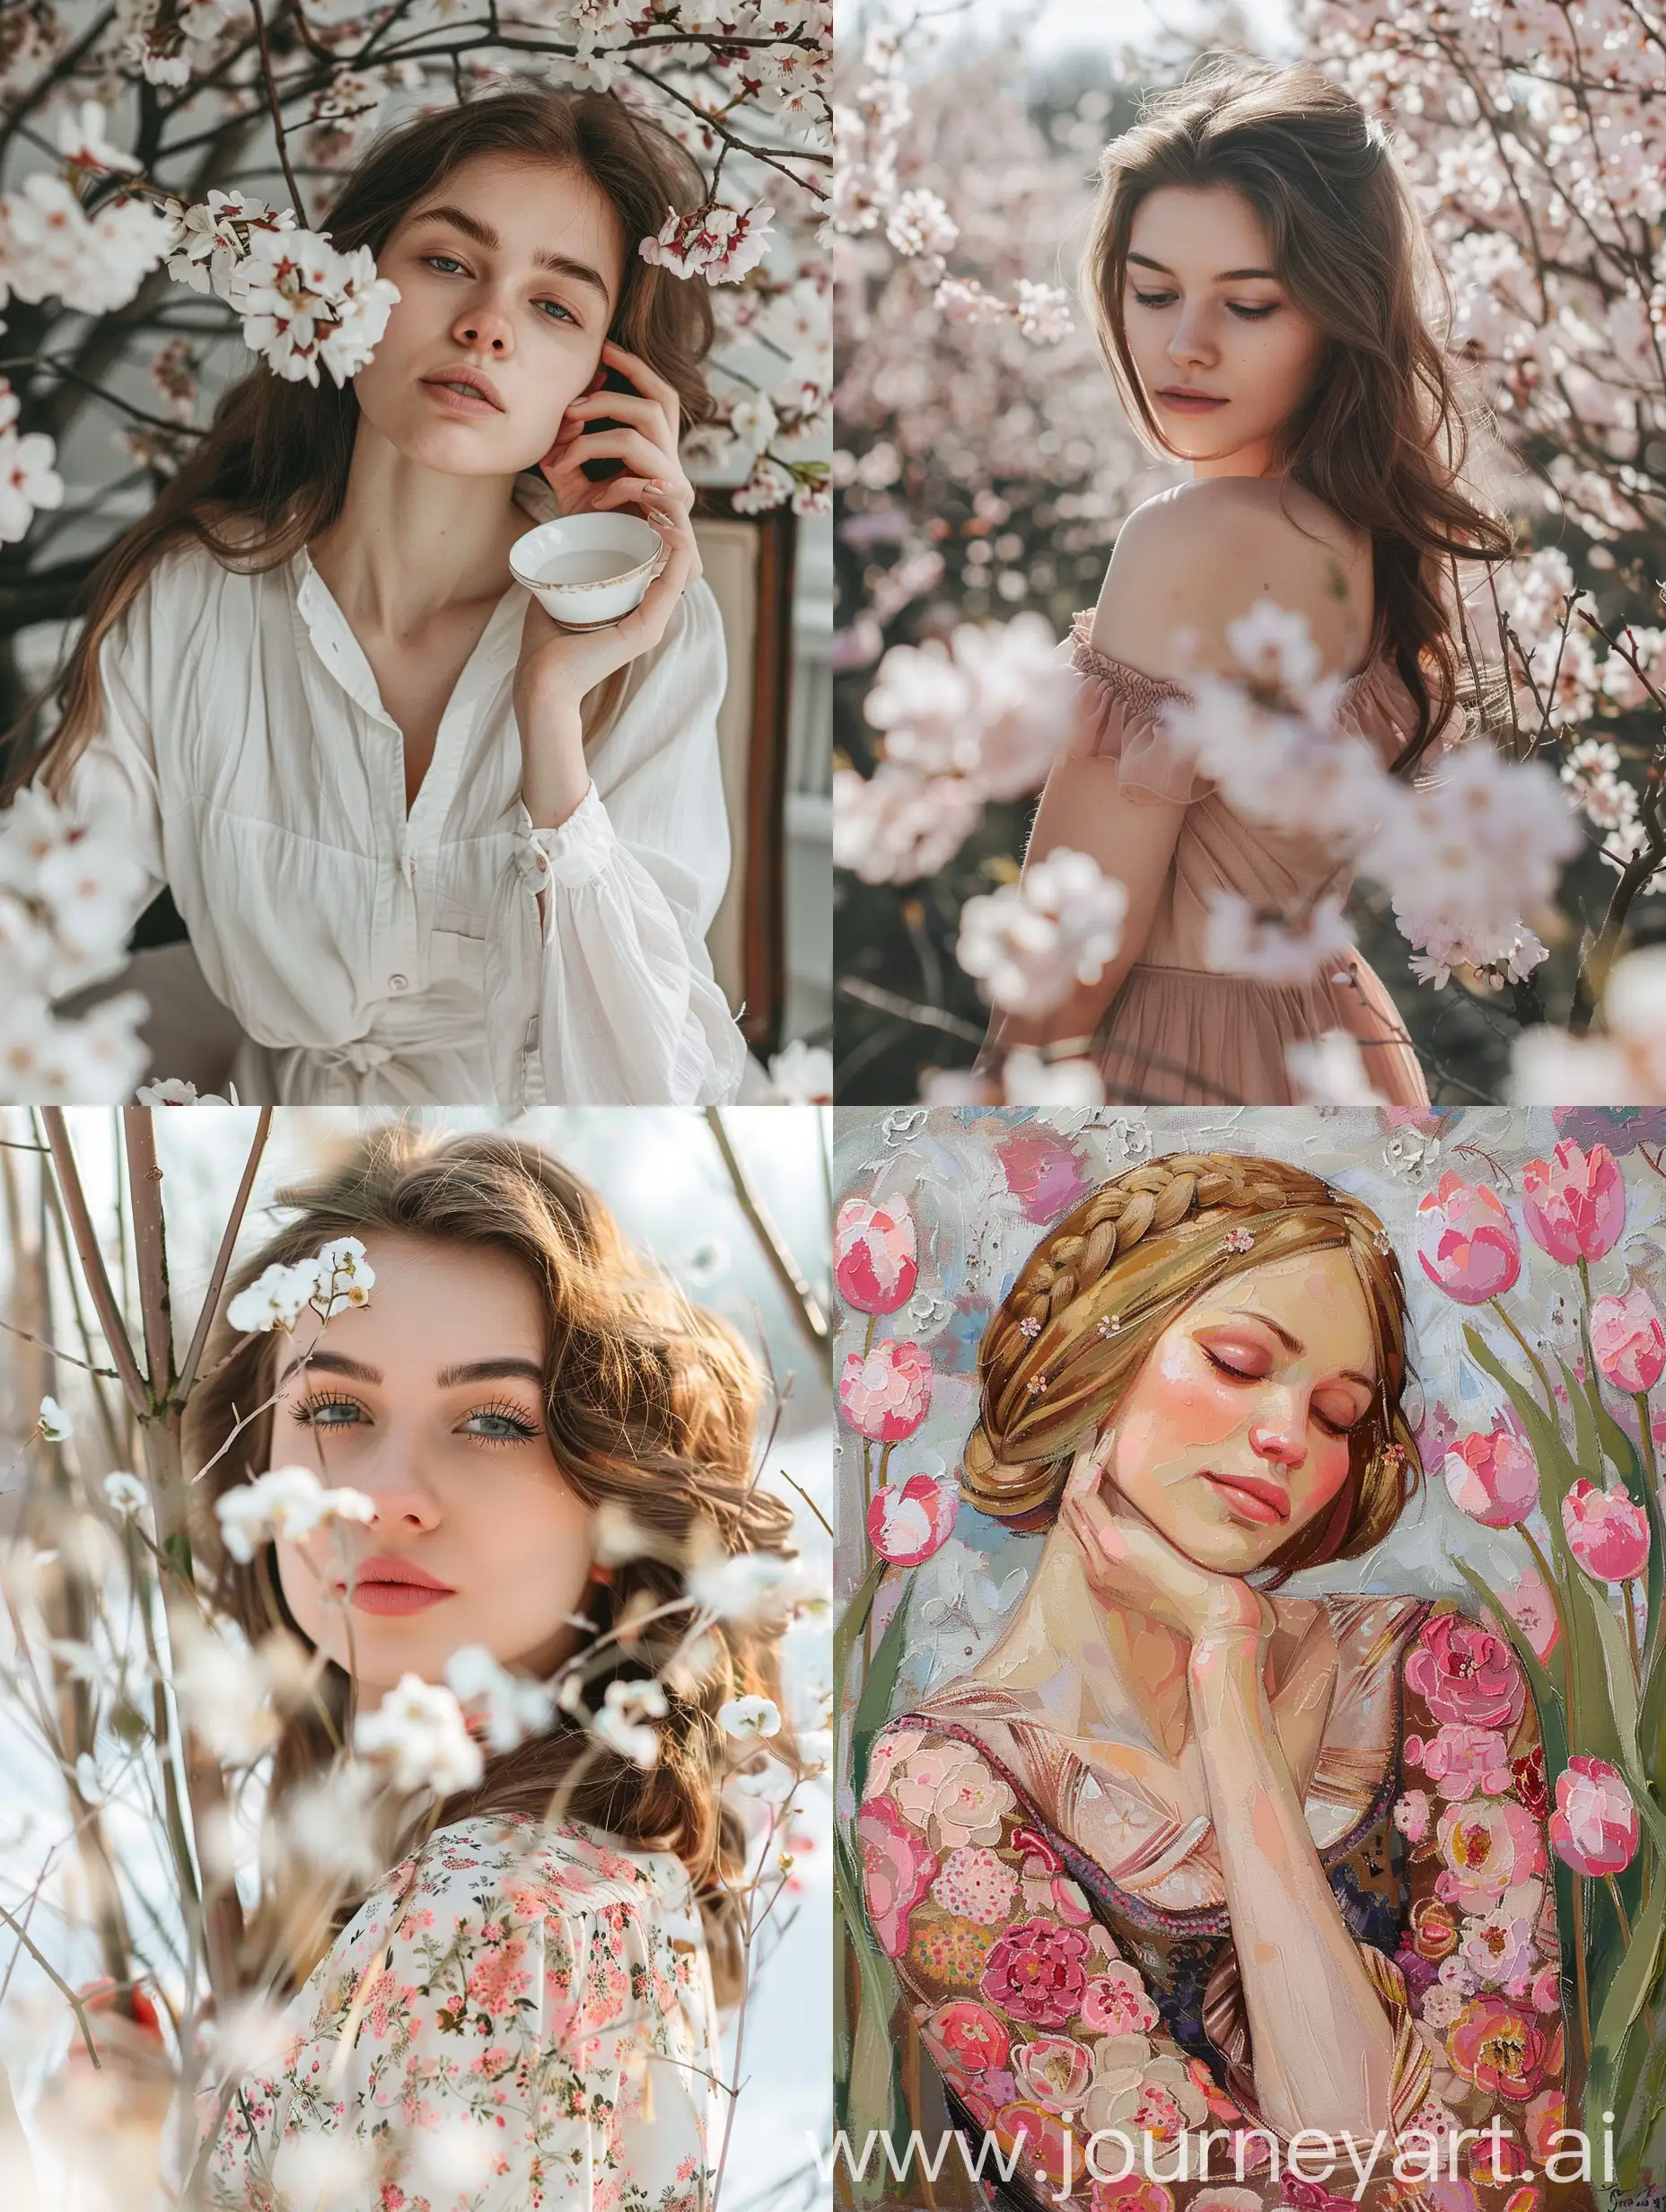 Celebrating-Womens-Day-with-Vibrant-Spring-Vibes-in-Russia